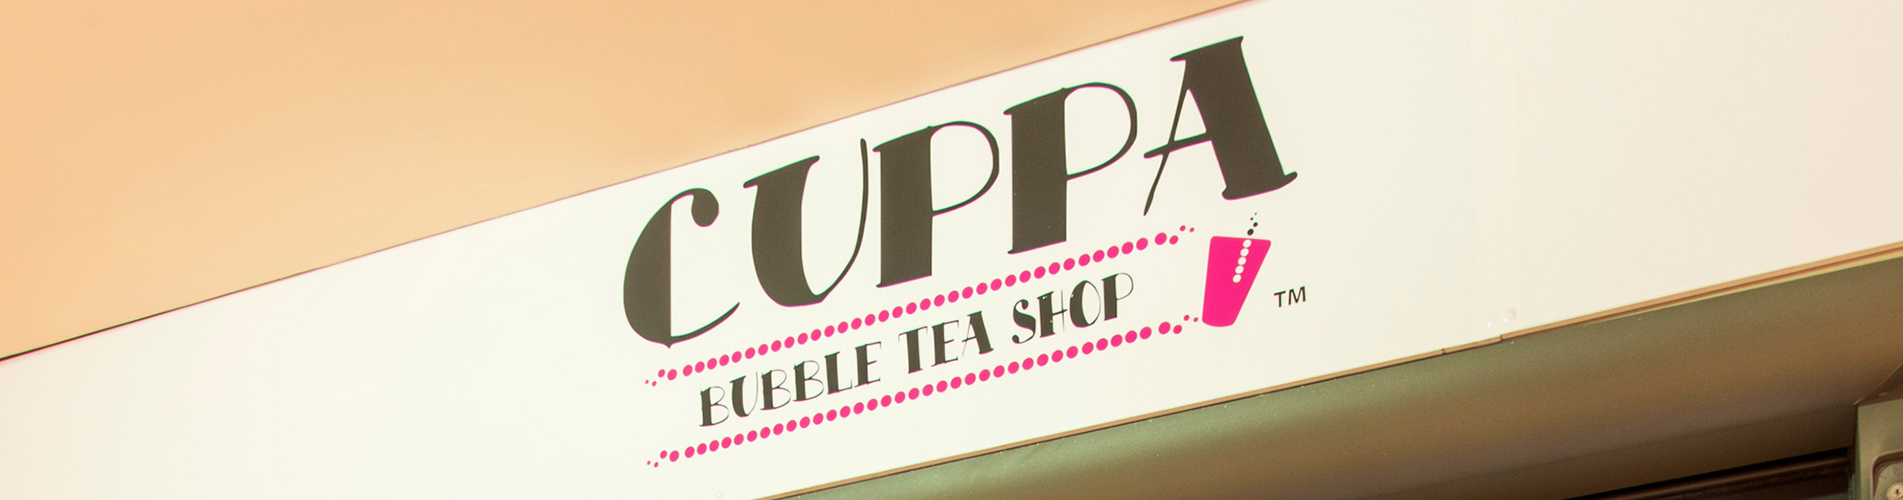 cuppa banner